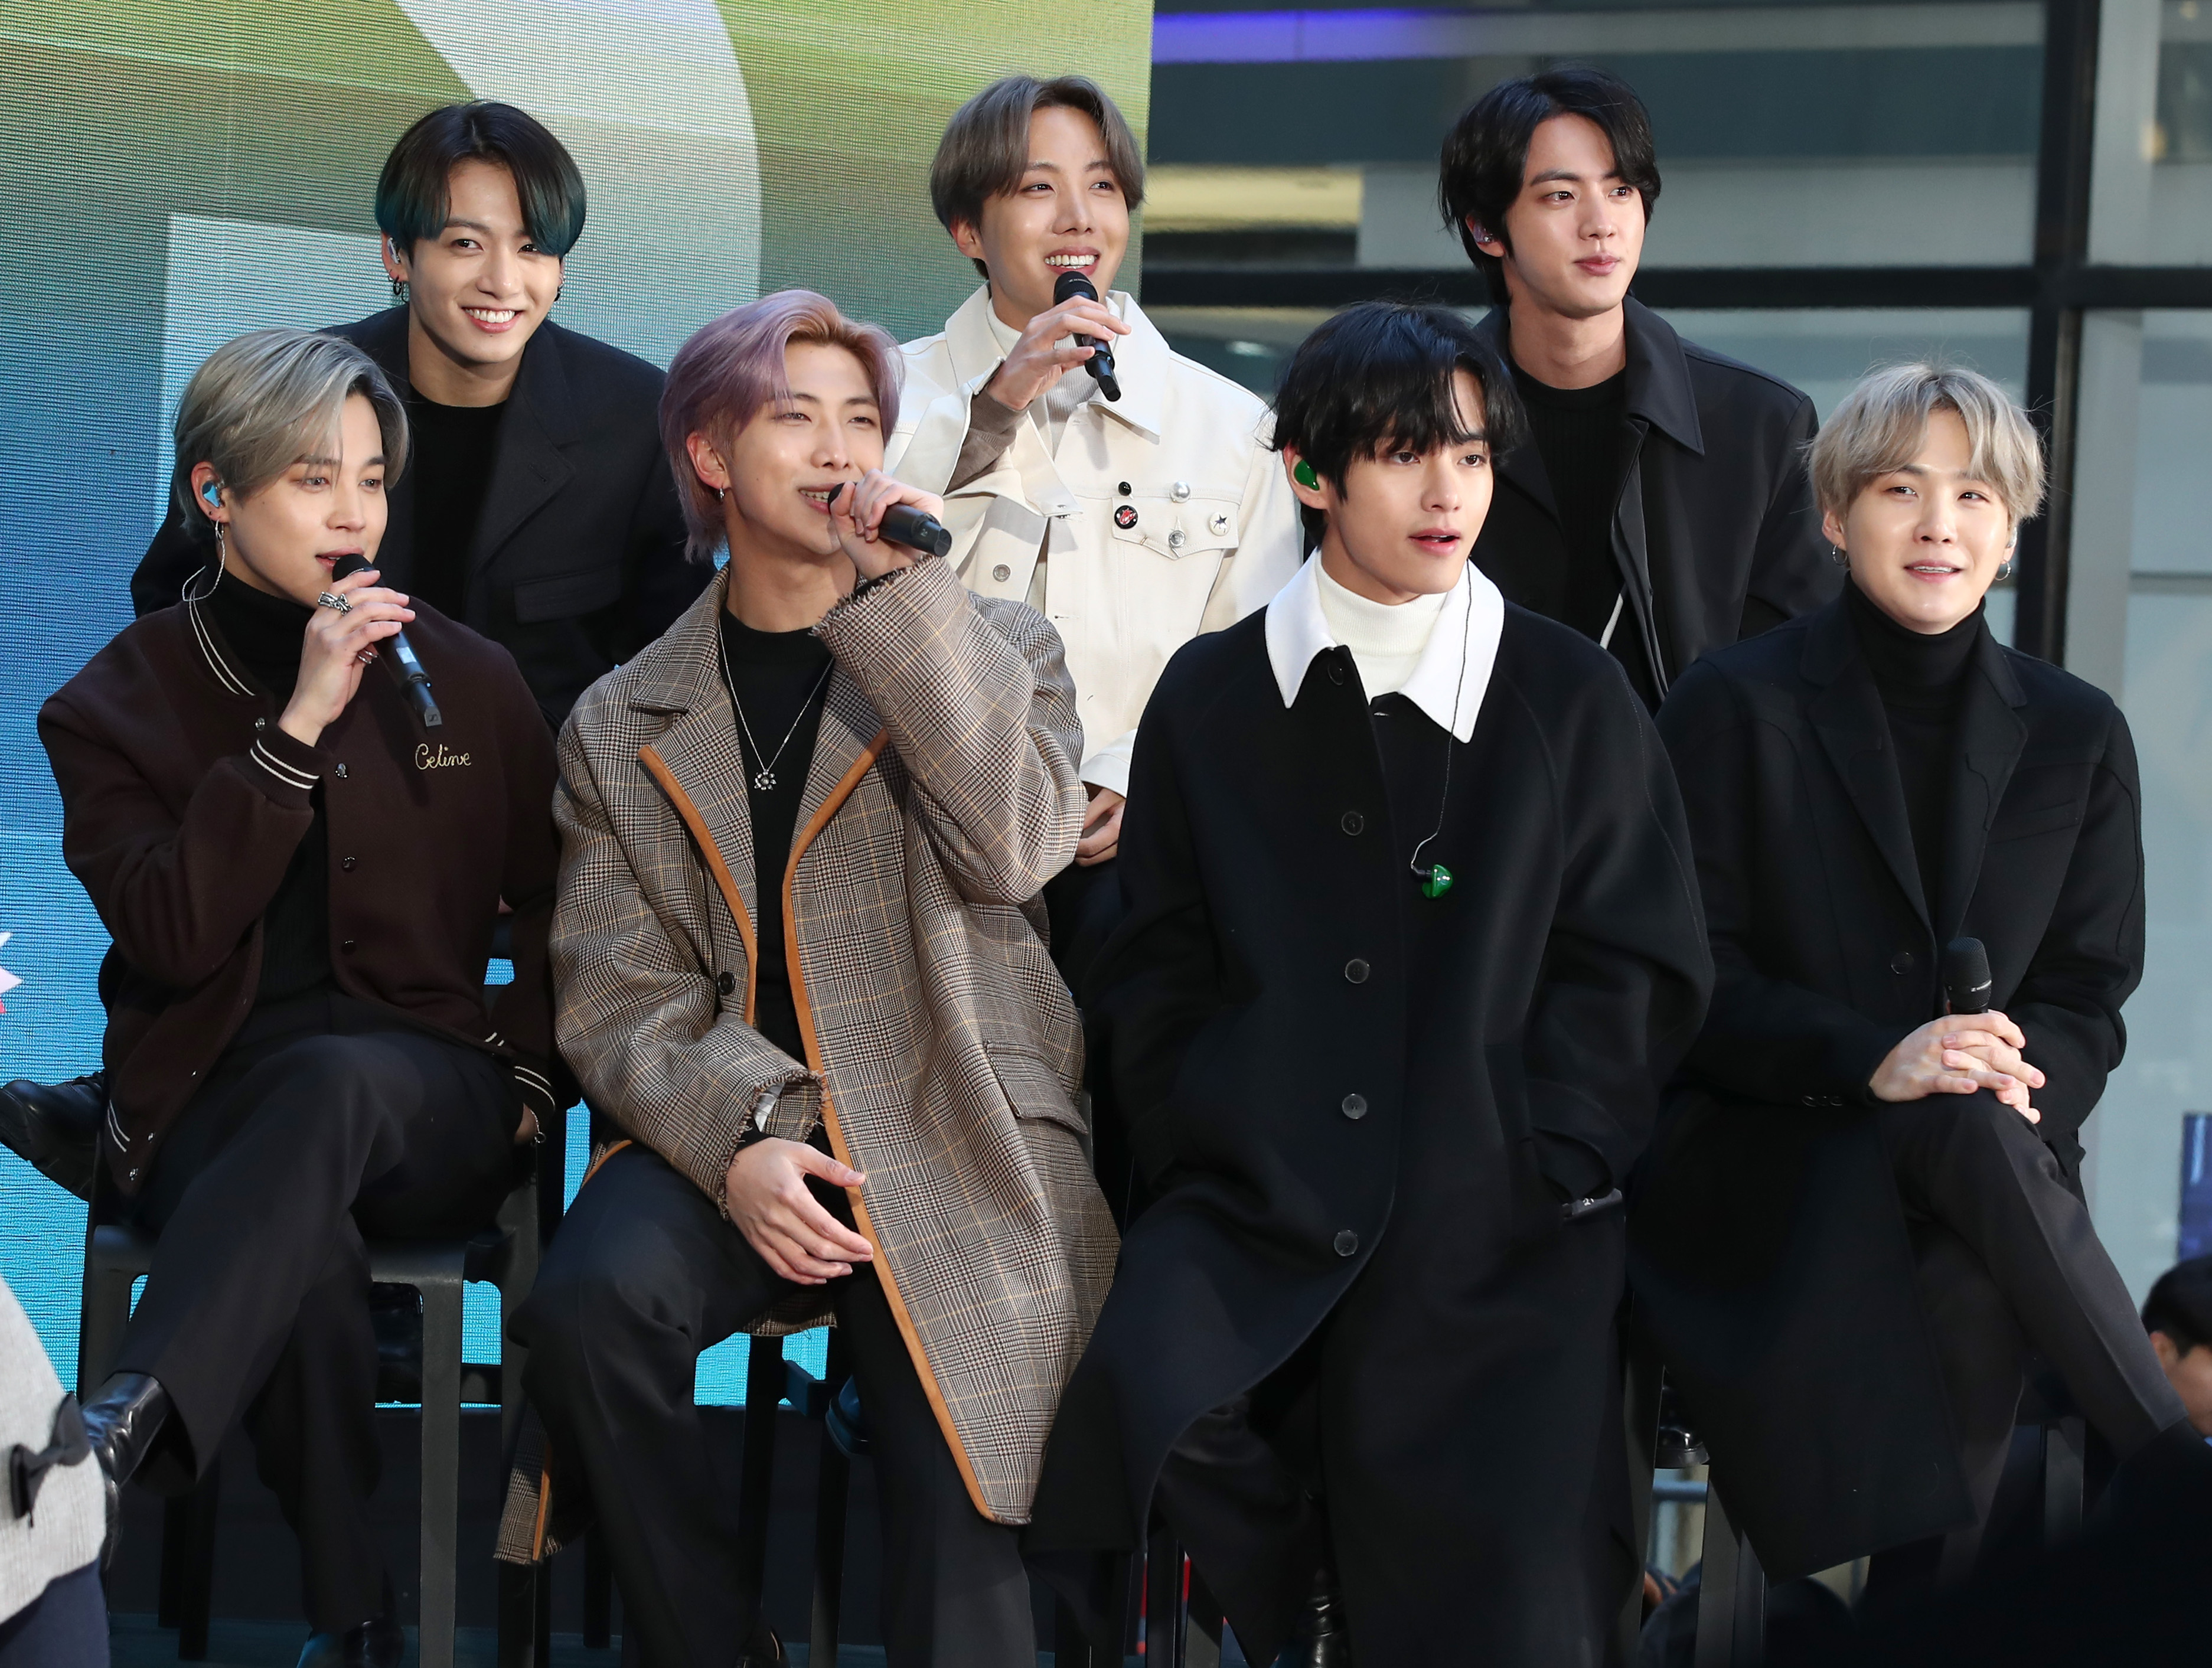 Jimin, Jungkook, RM, J-Hope, V, Jin, and SUGA of the K-pop boy band BTS visit the "Today" Show at Rockefeller Plaza on February 21, 2020 in New York City. (WireImage)